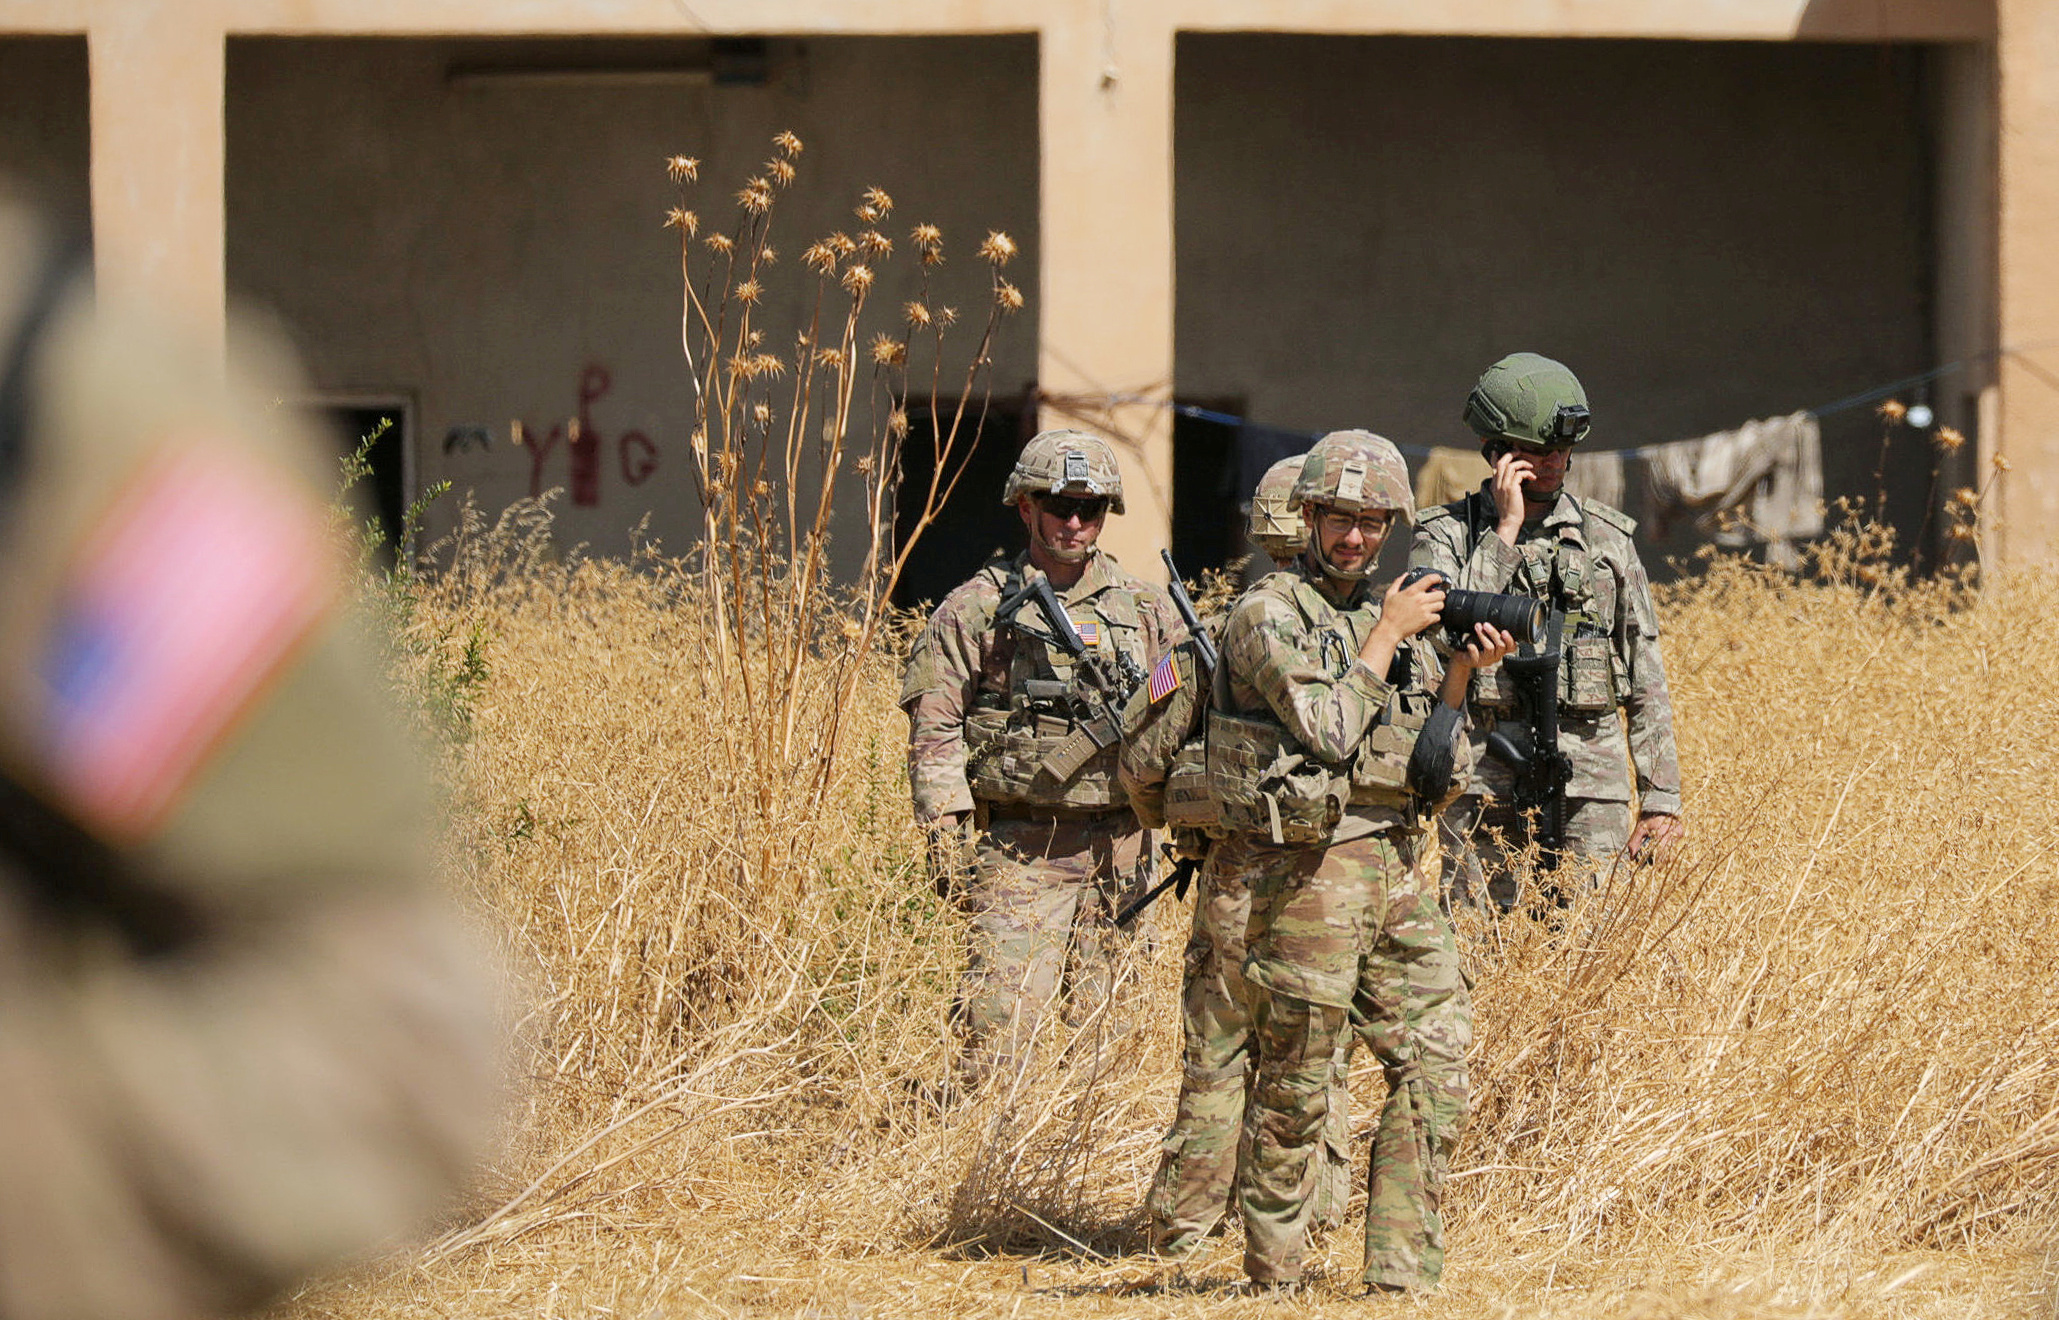 PHOTO: Turkish and American soldiers stand near a former YPG military point during a joint U.S.-Turkey patrol, near Tel Abyad, Syria, on Sept. 8, 2019.